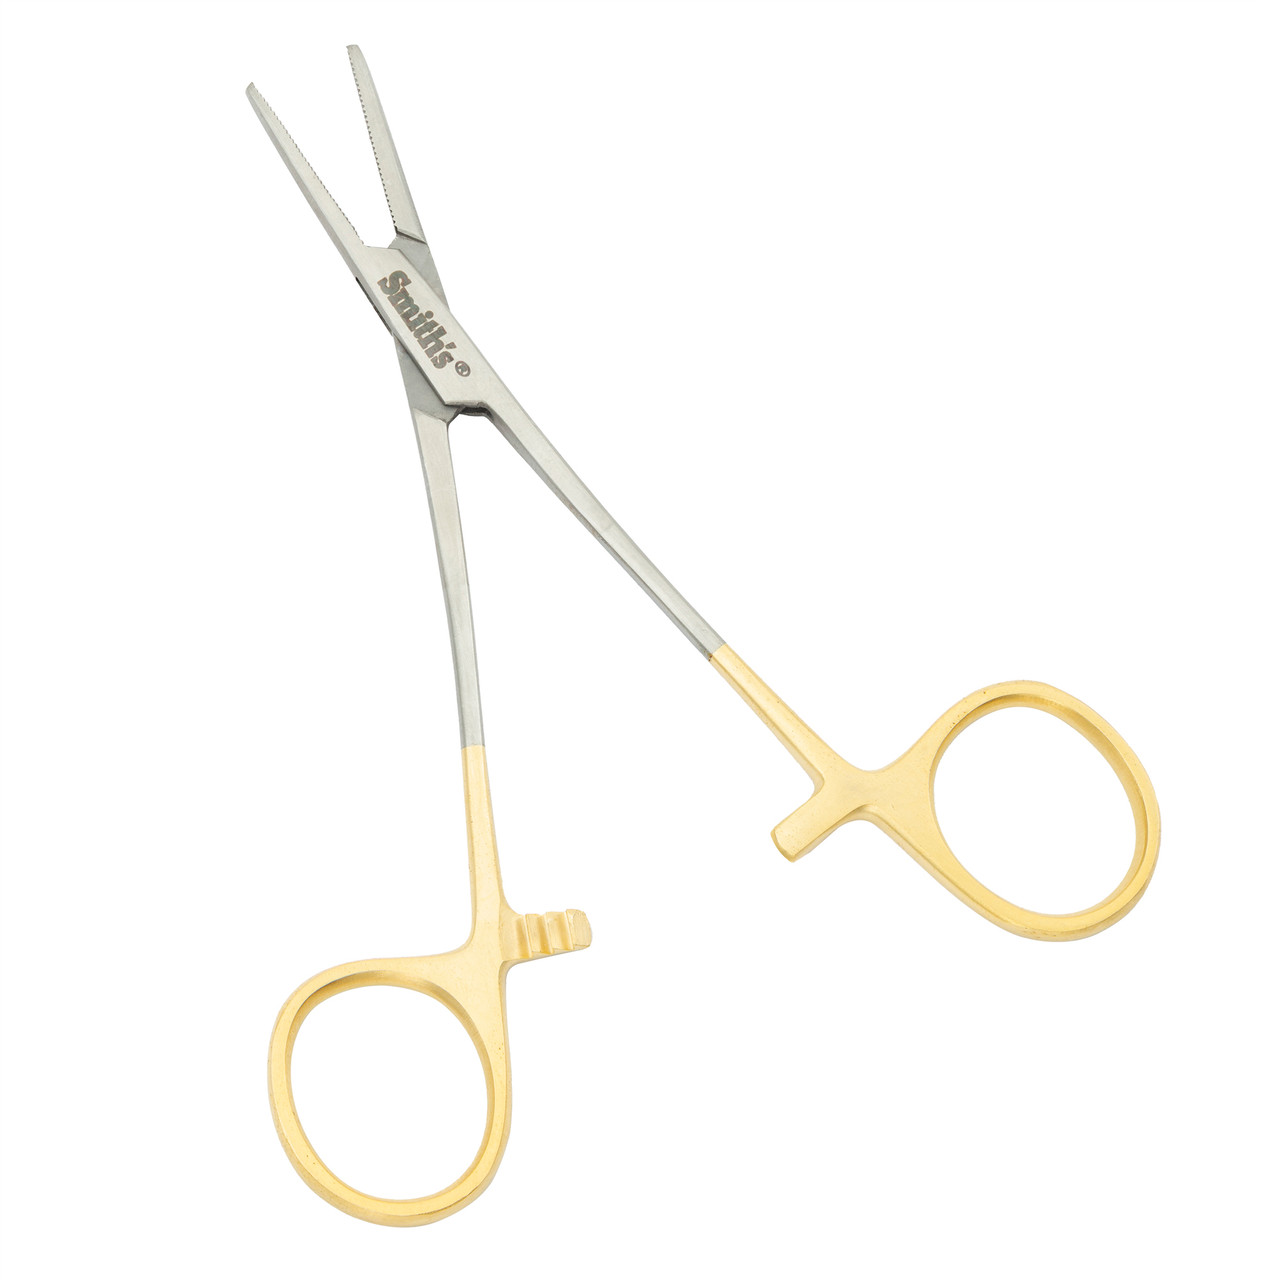 5 Fly Fishing Forceps - Smith's Consumer Products